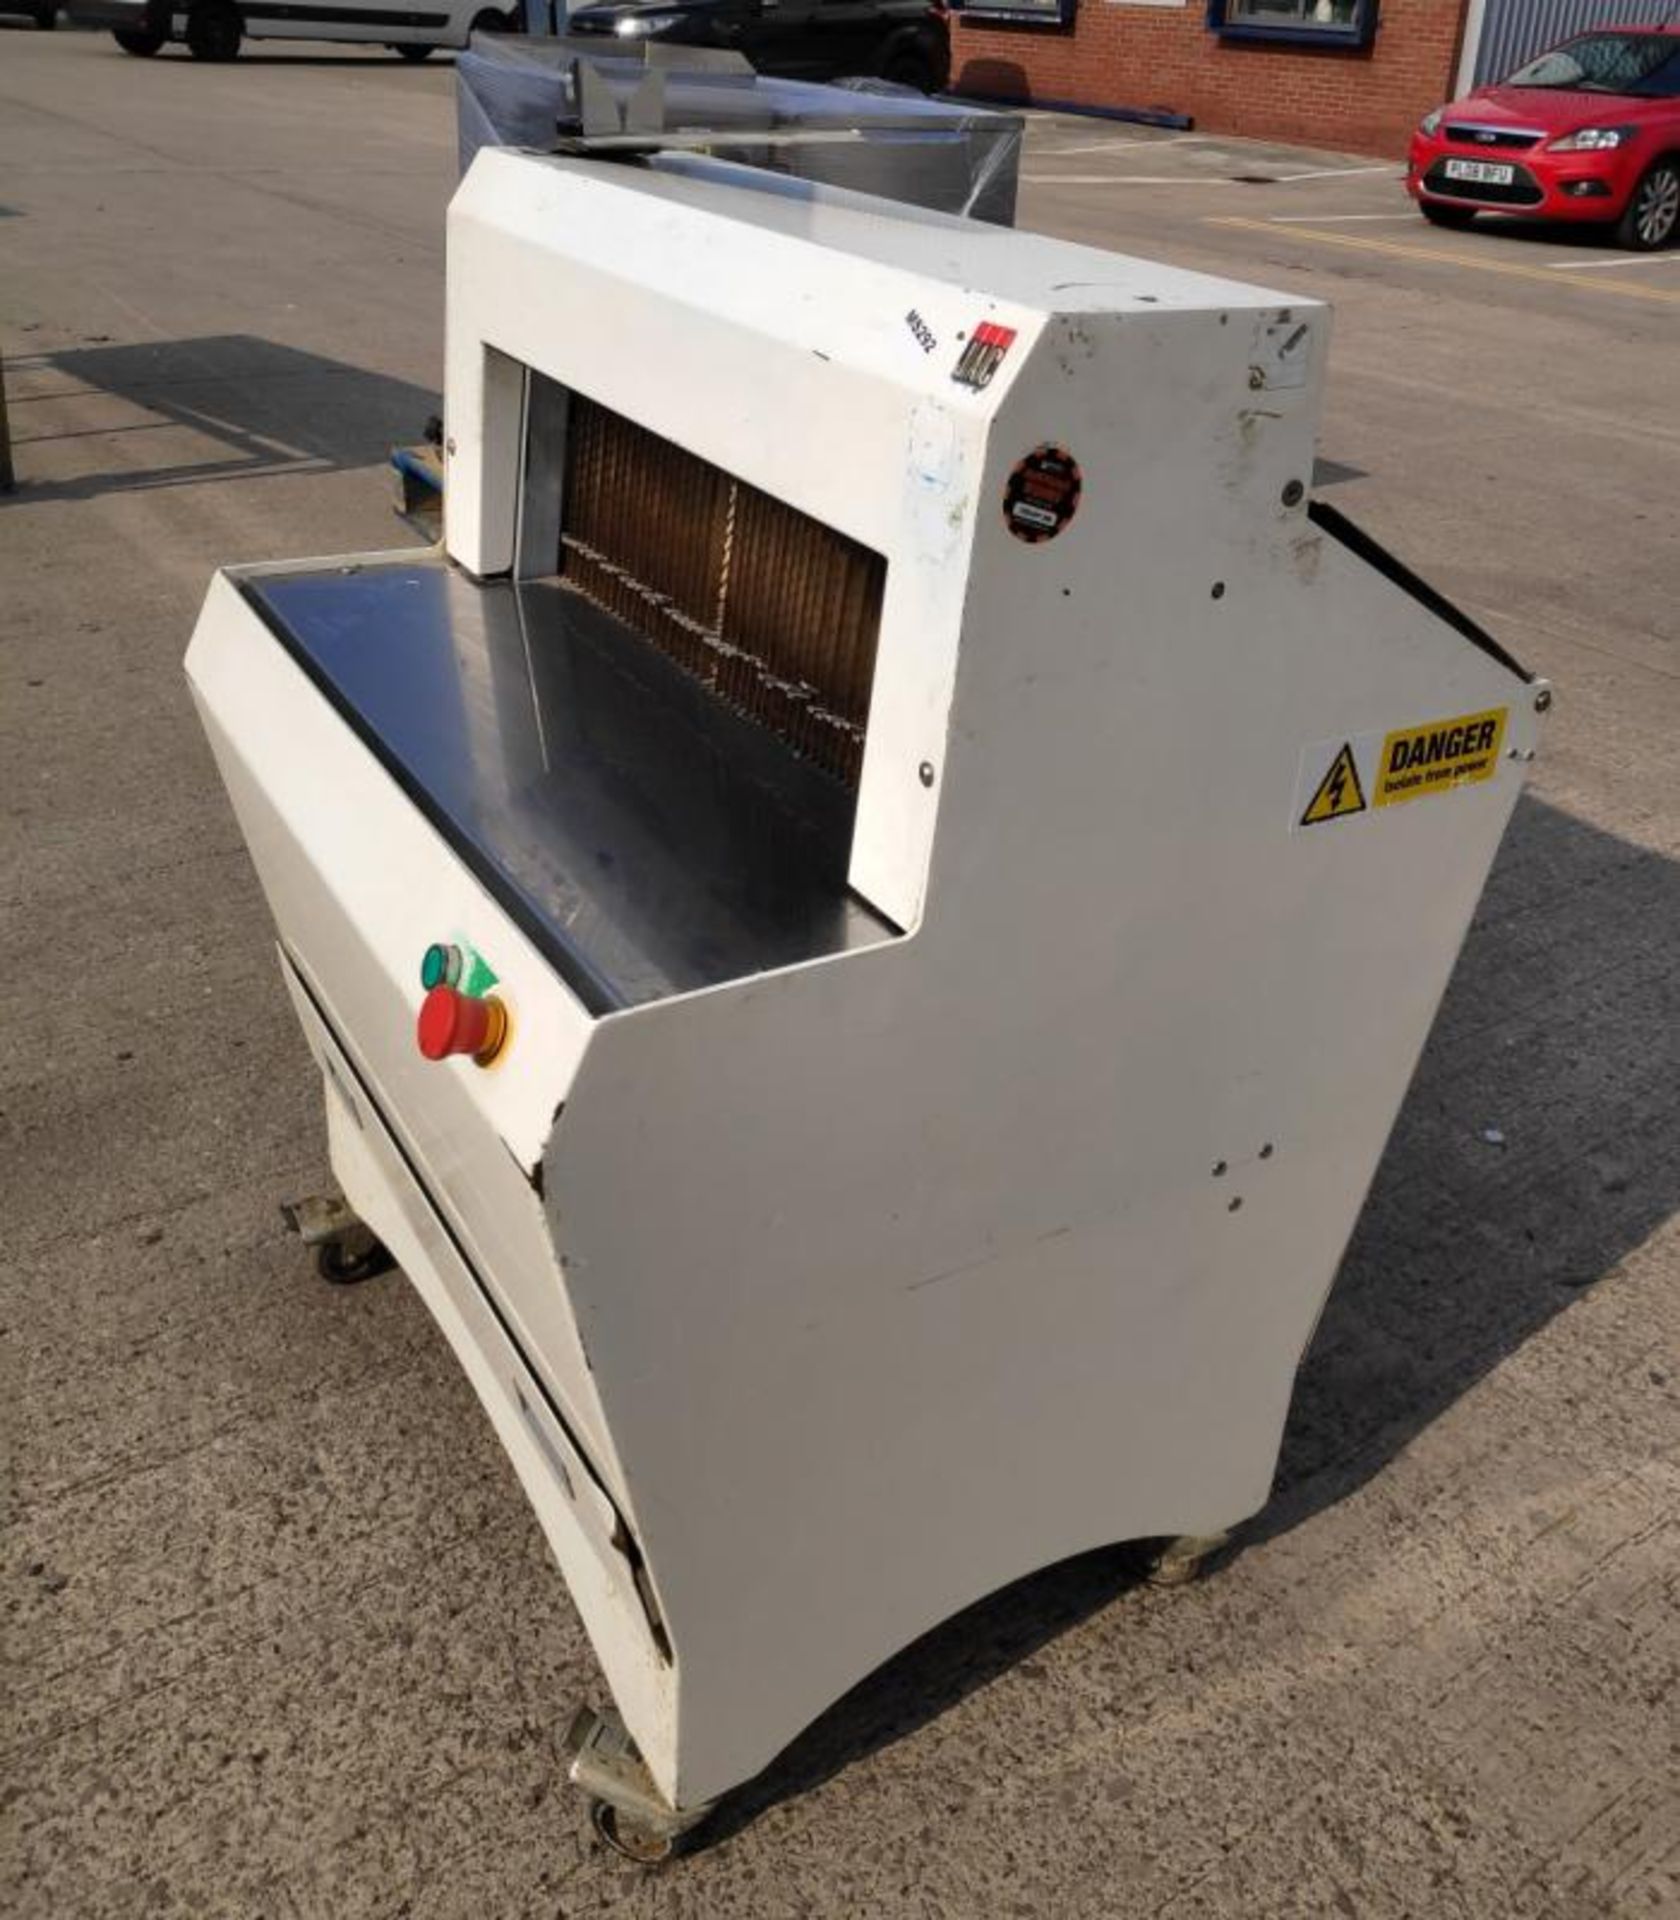 1 x JAC EEK 600/12 Single Phase Bread Slicer - Dimensions: 118L x 80H x 79W cm - Very Recently Remov - Image 4 of 14